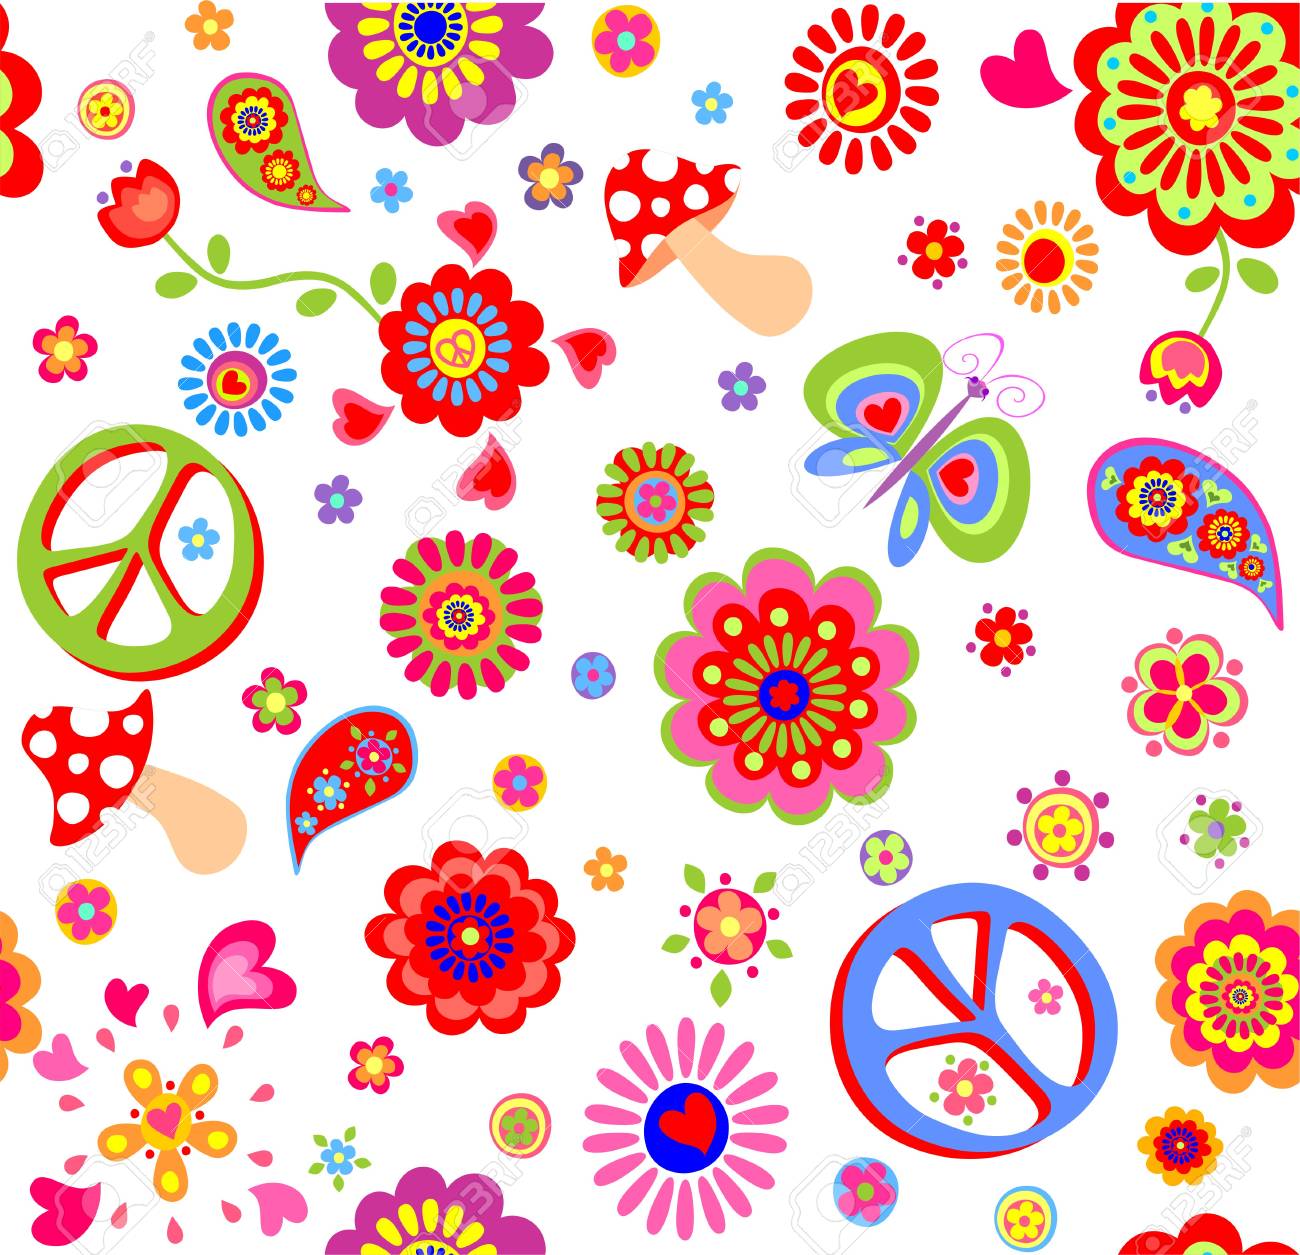 Childish Wallpaper With Hippie Peace Symbol Flower Power Poppies